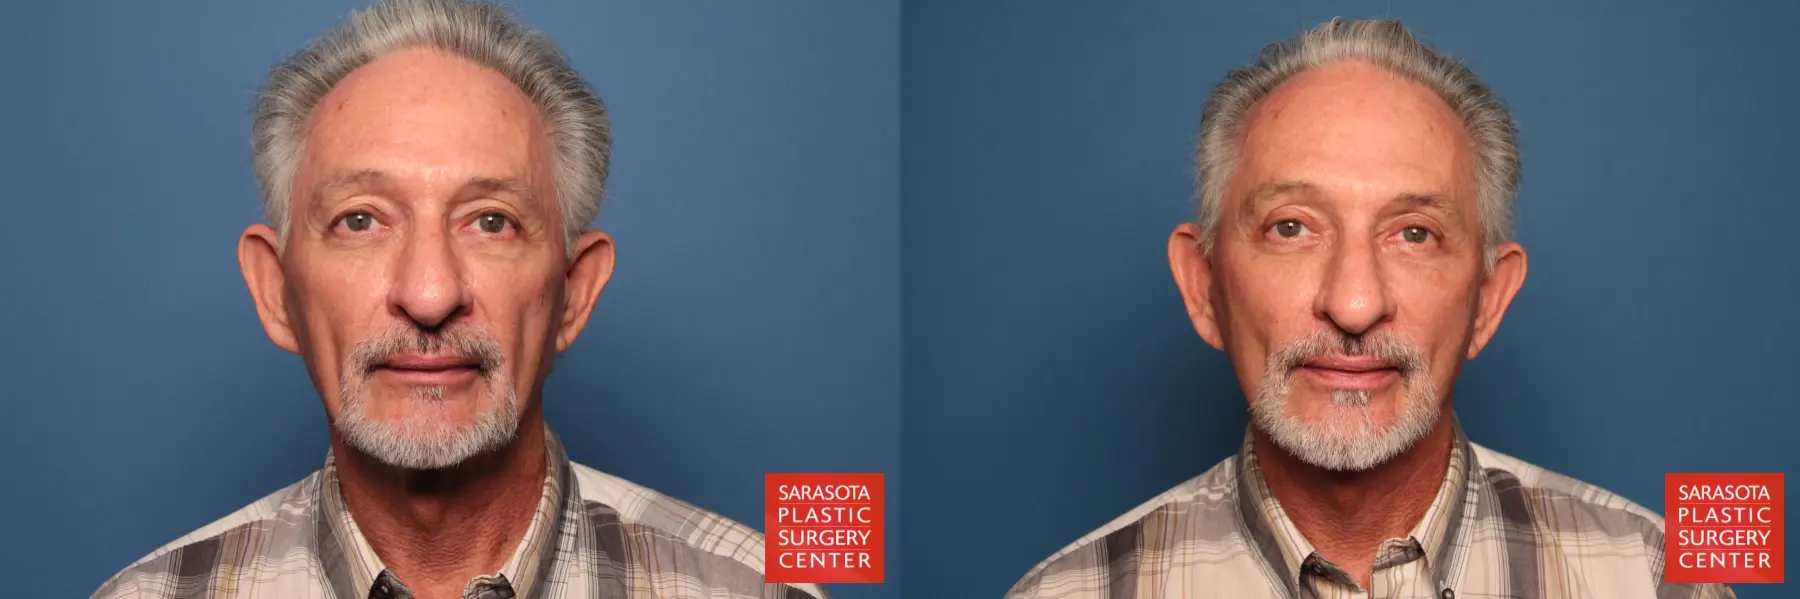 Facelift-for-men: Patient 1 - Before and After  